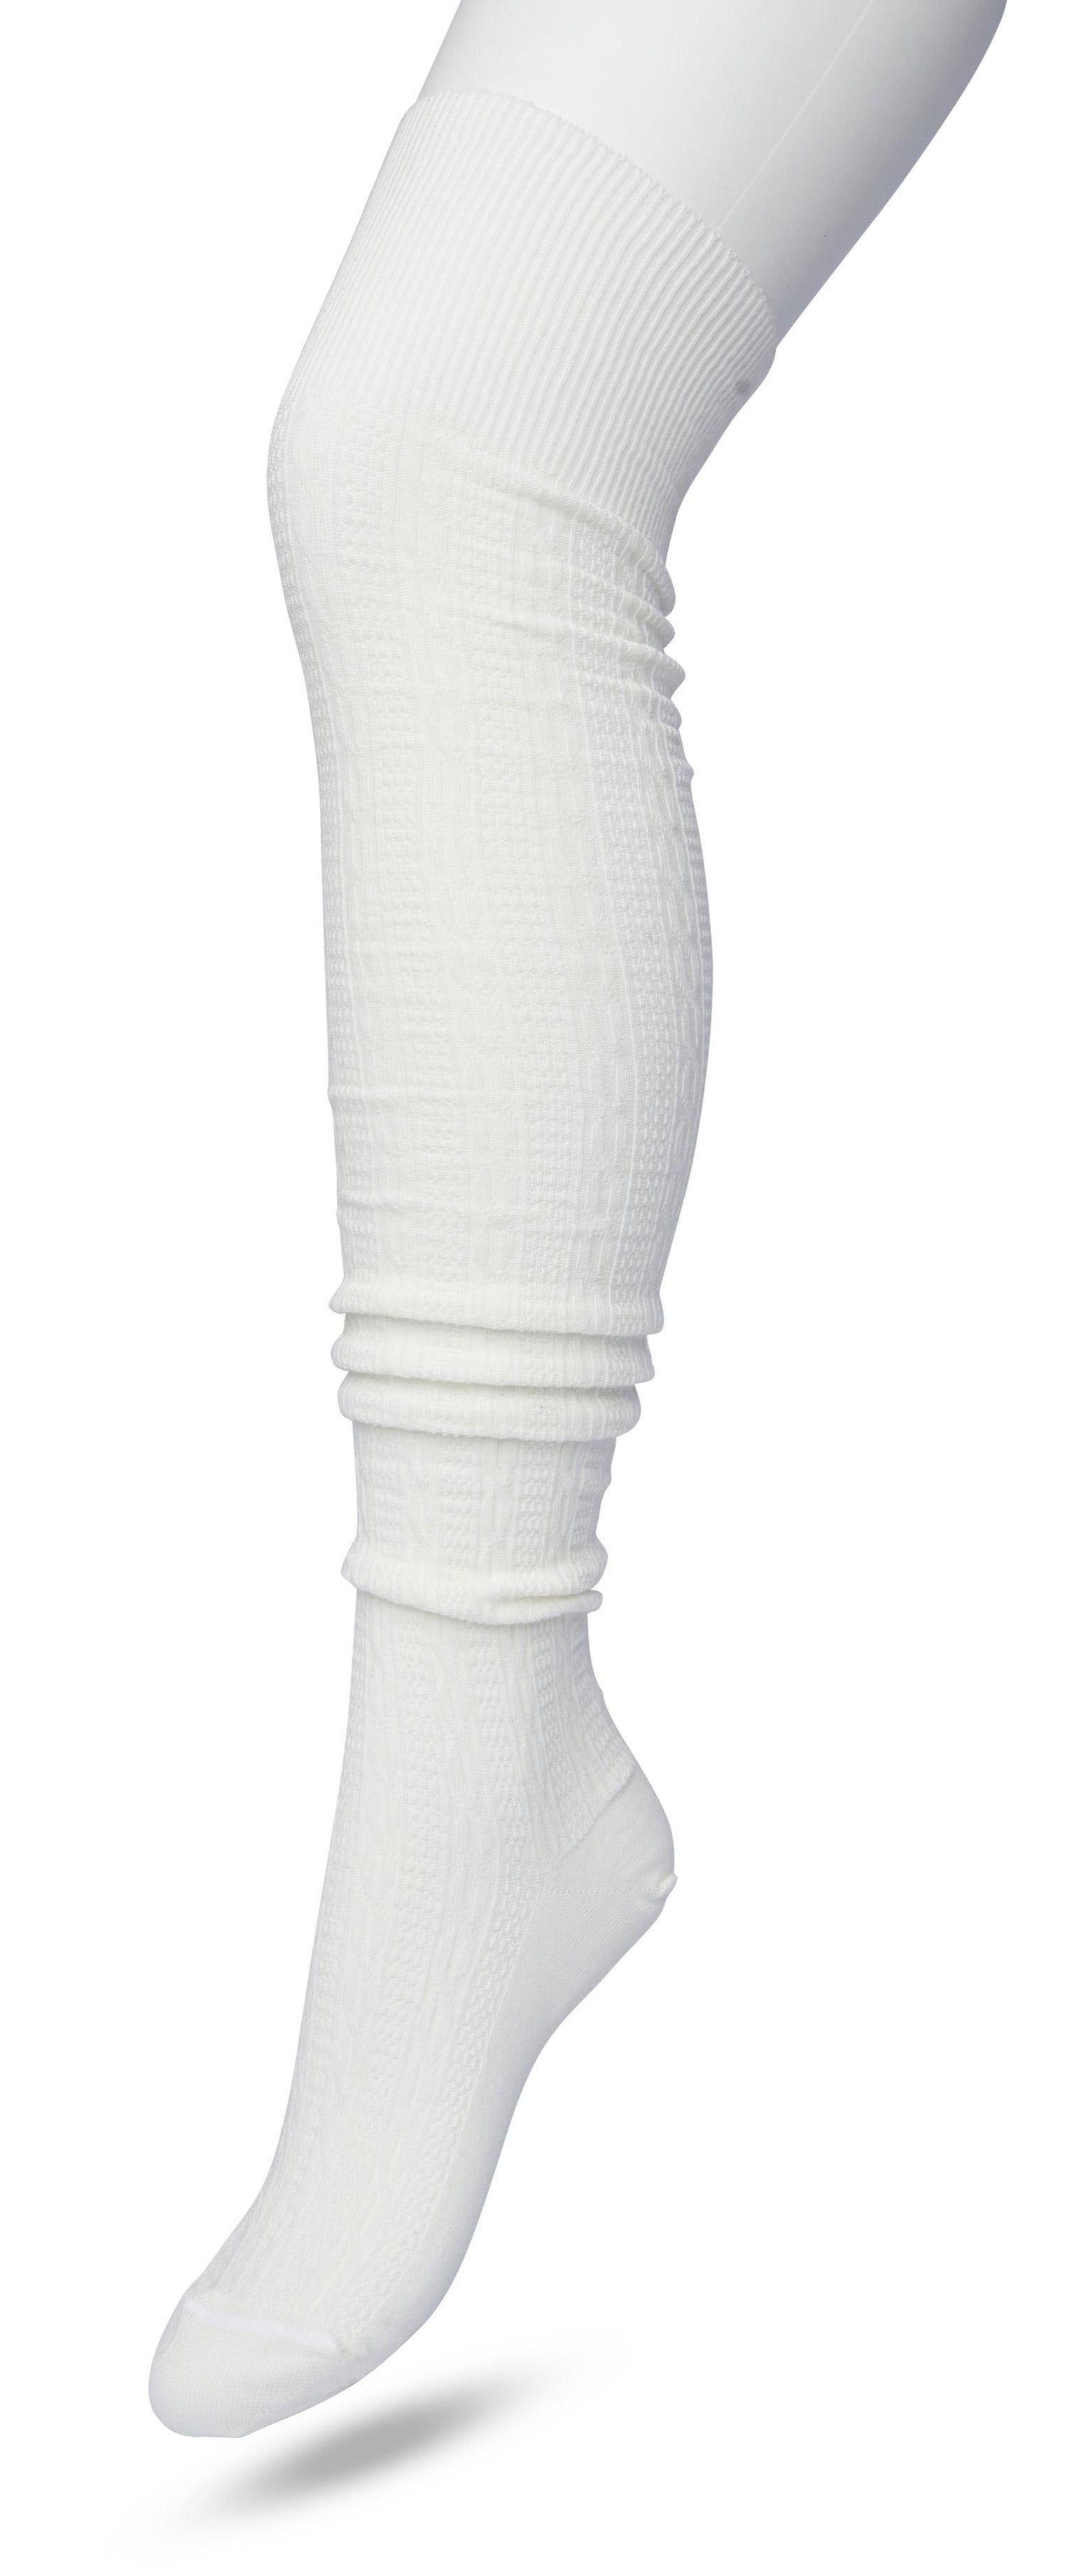 Bonnie Doon Cable Over-Knee Sock - Cream / ivory (off-white) cotton knitted over the knee socks with a cable knit style ribbed pattern 